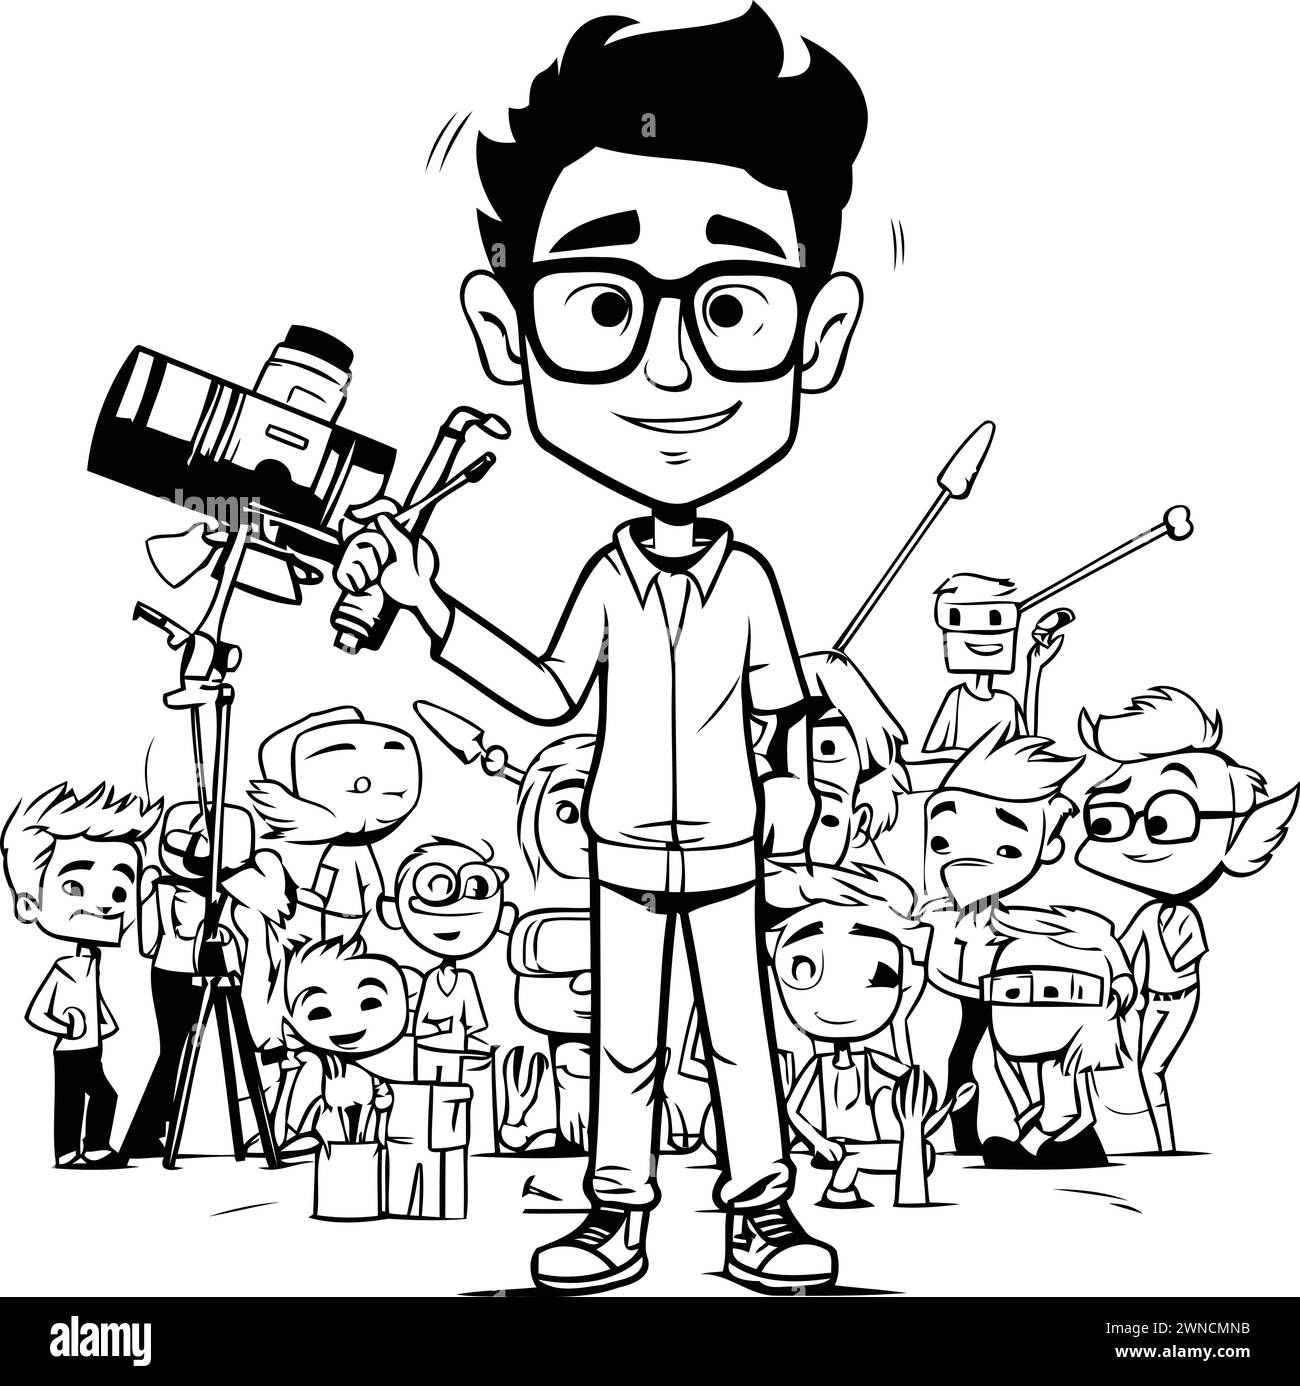 Cartoon Illustration of Movie Cameraman or Journalist Character for Coloring Book Stock Vector